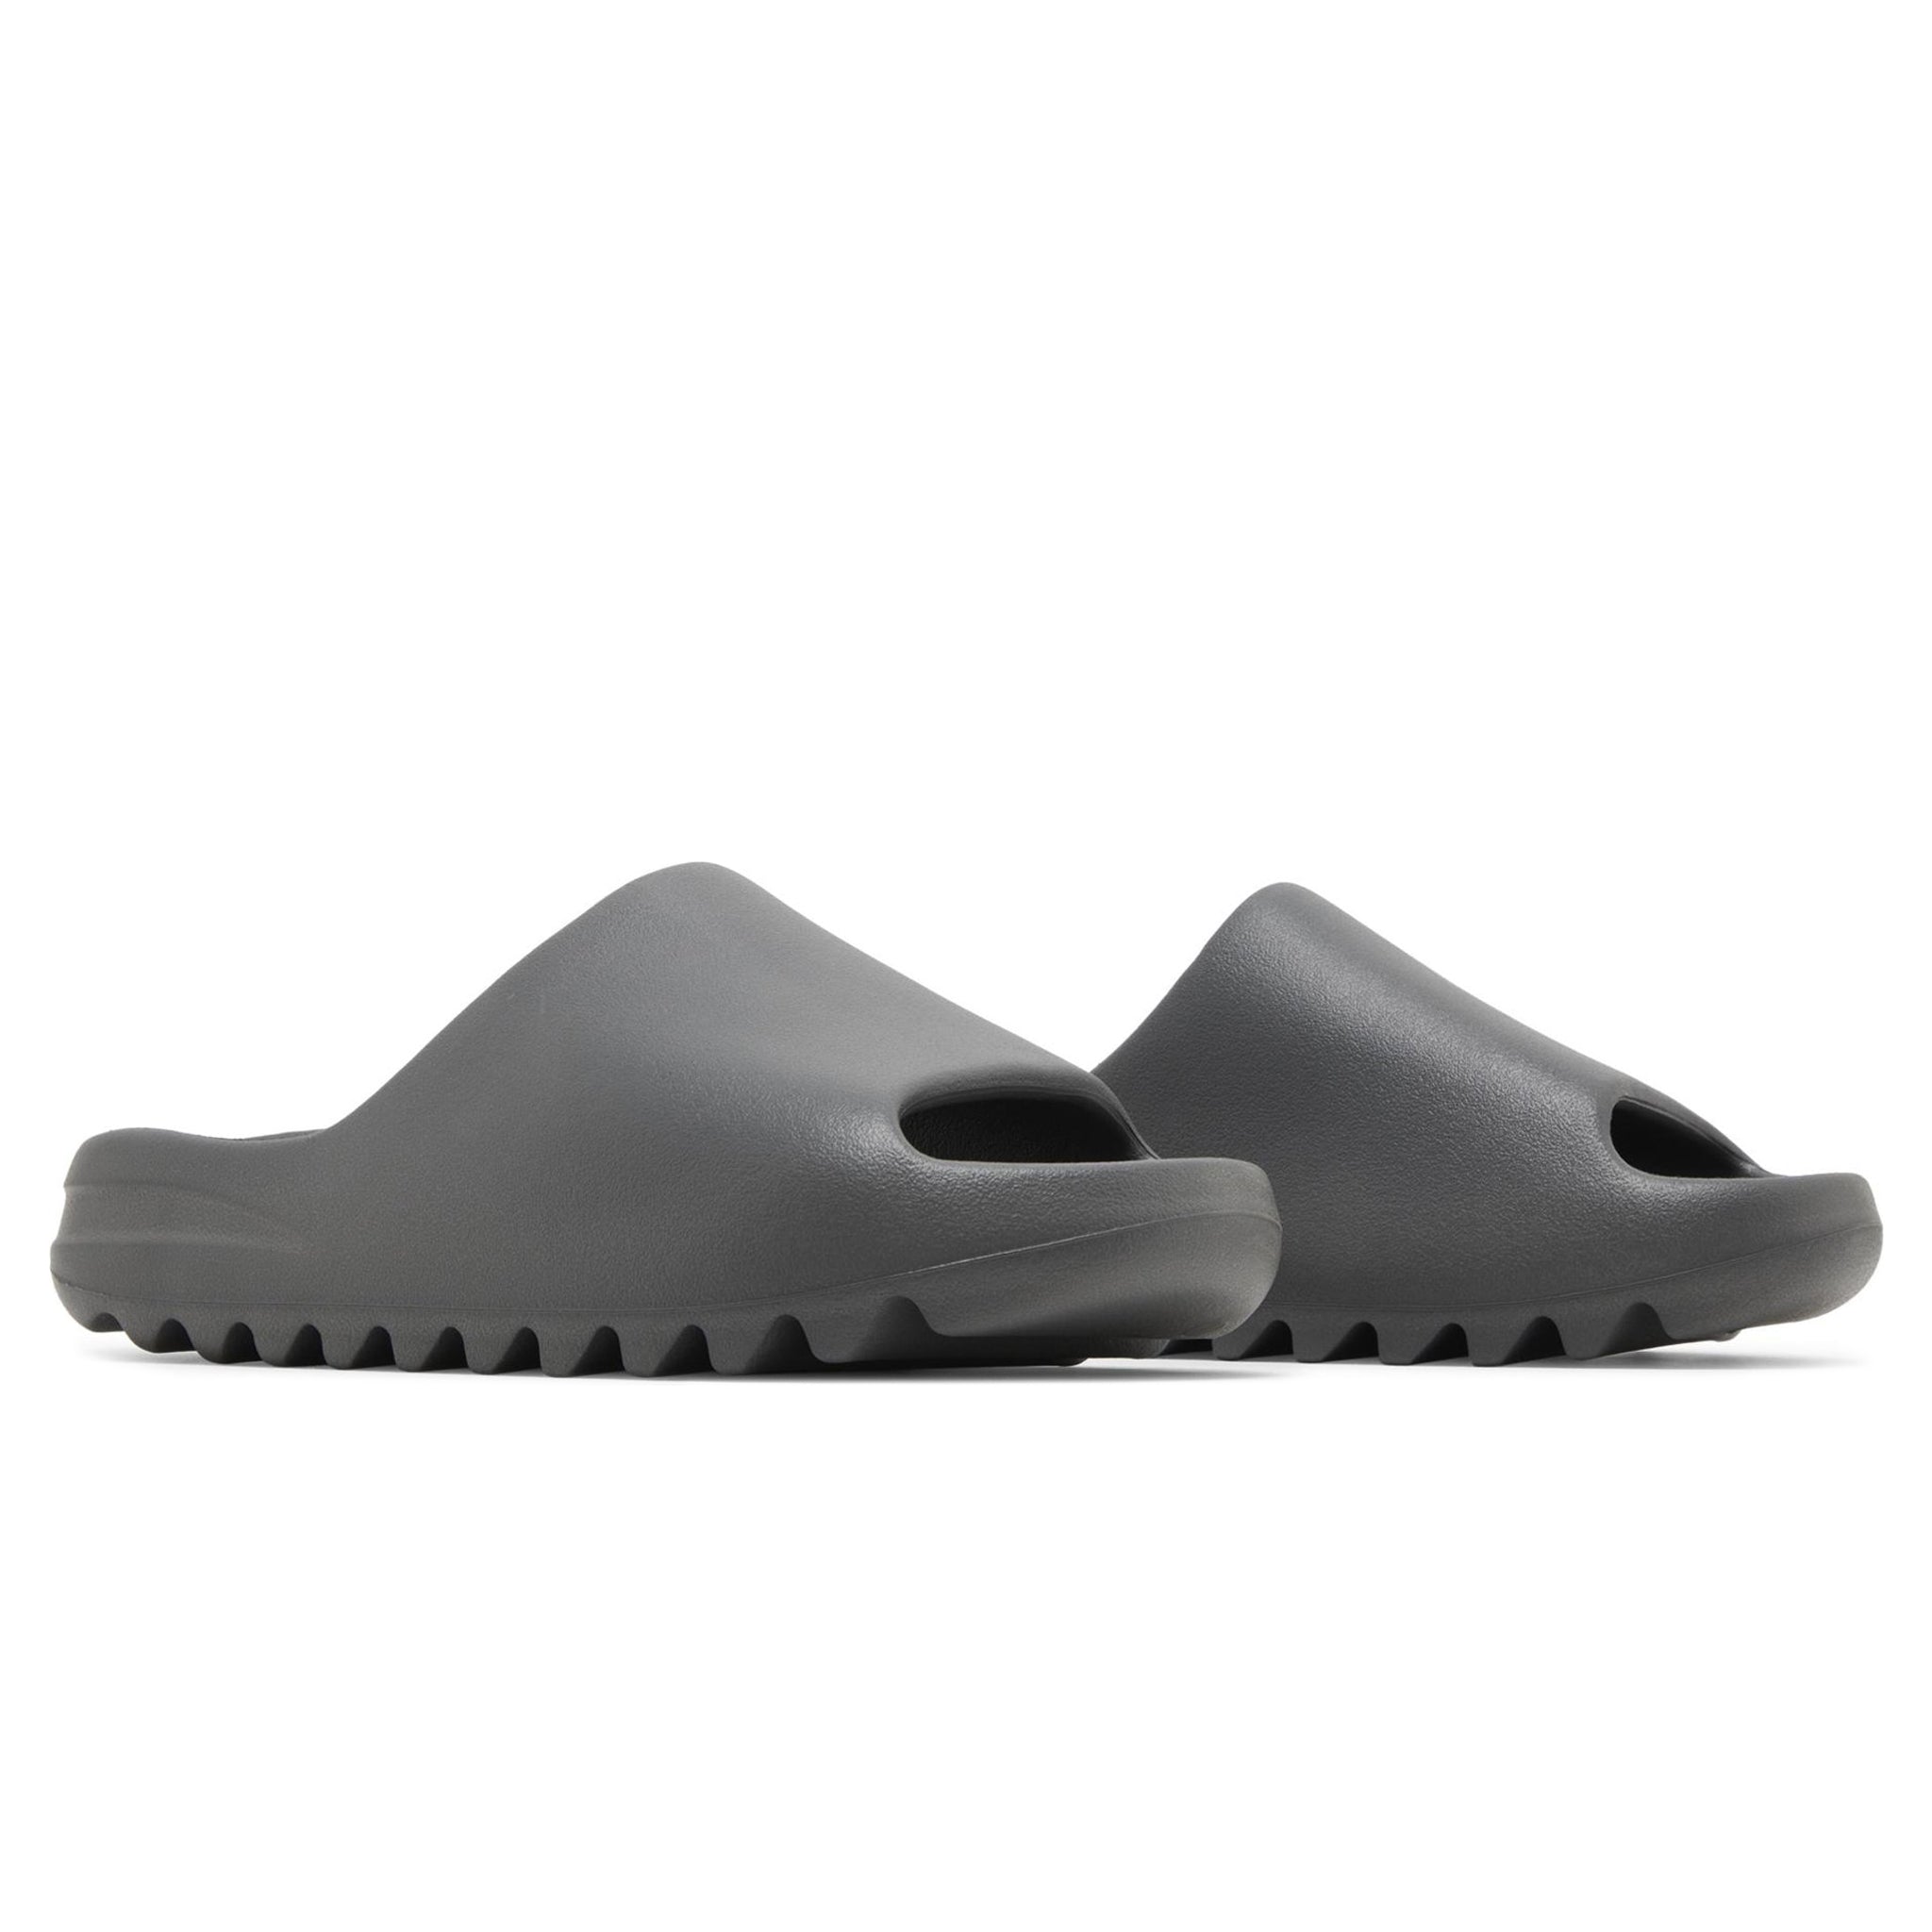 Front side view of Adidas Yeezy Slide Granite ID4132